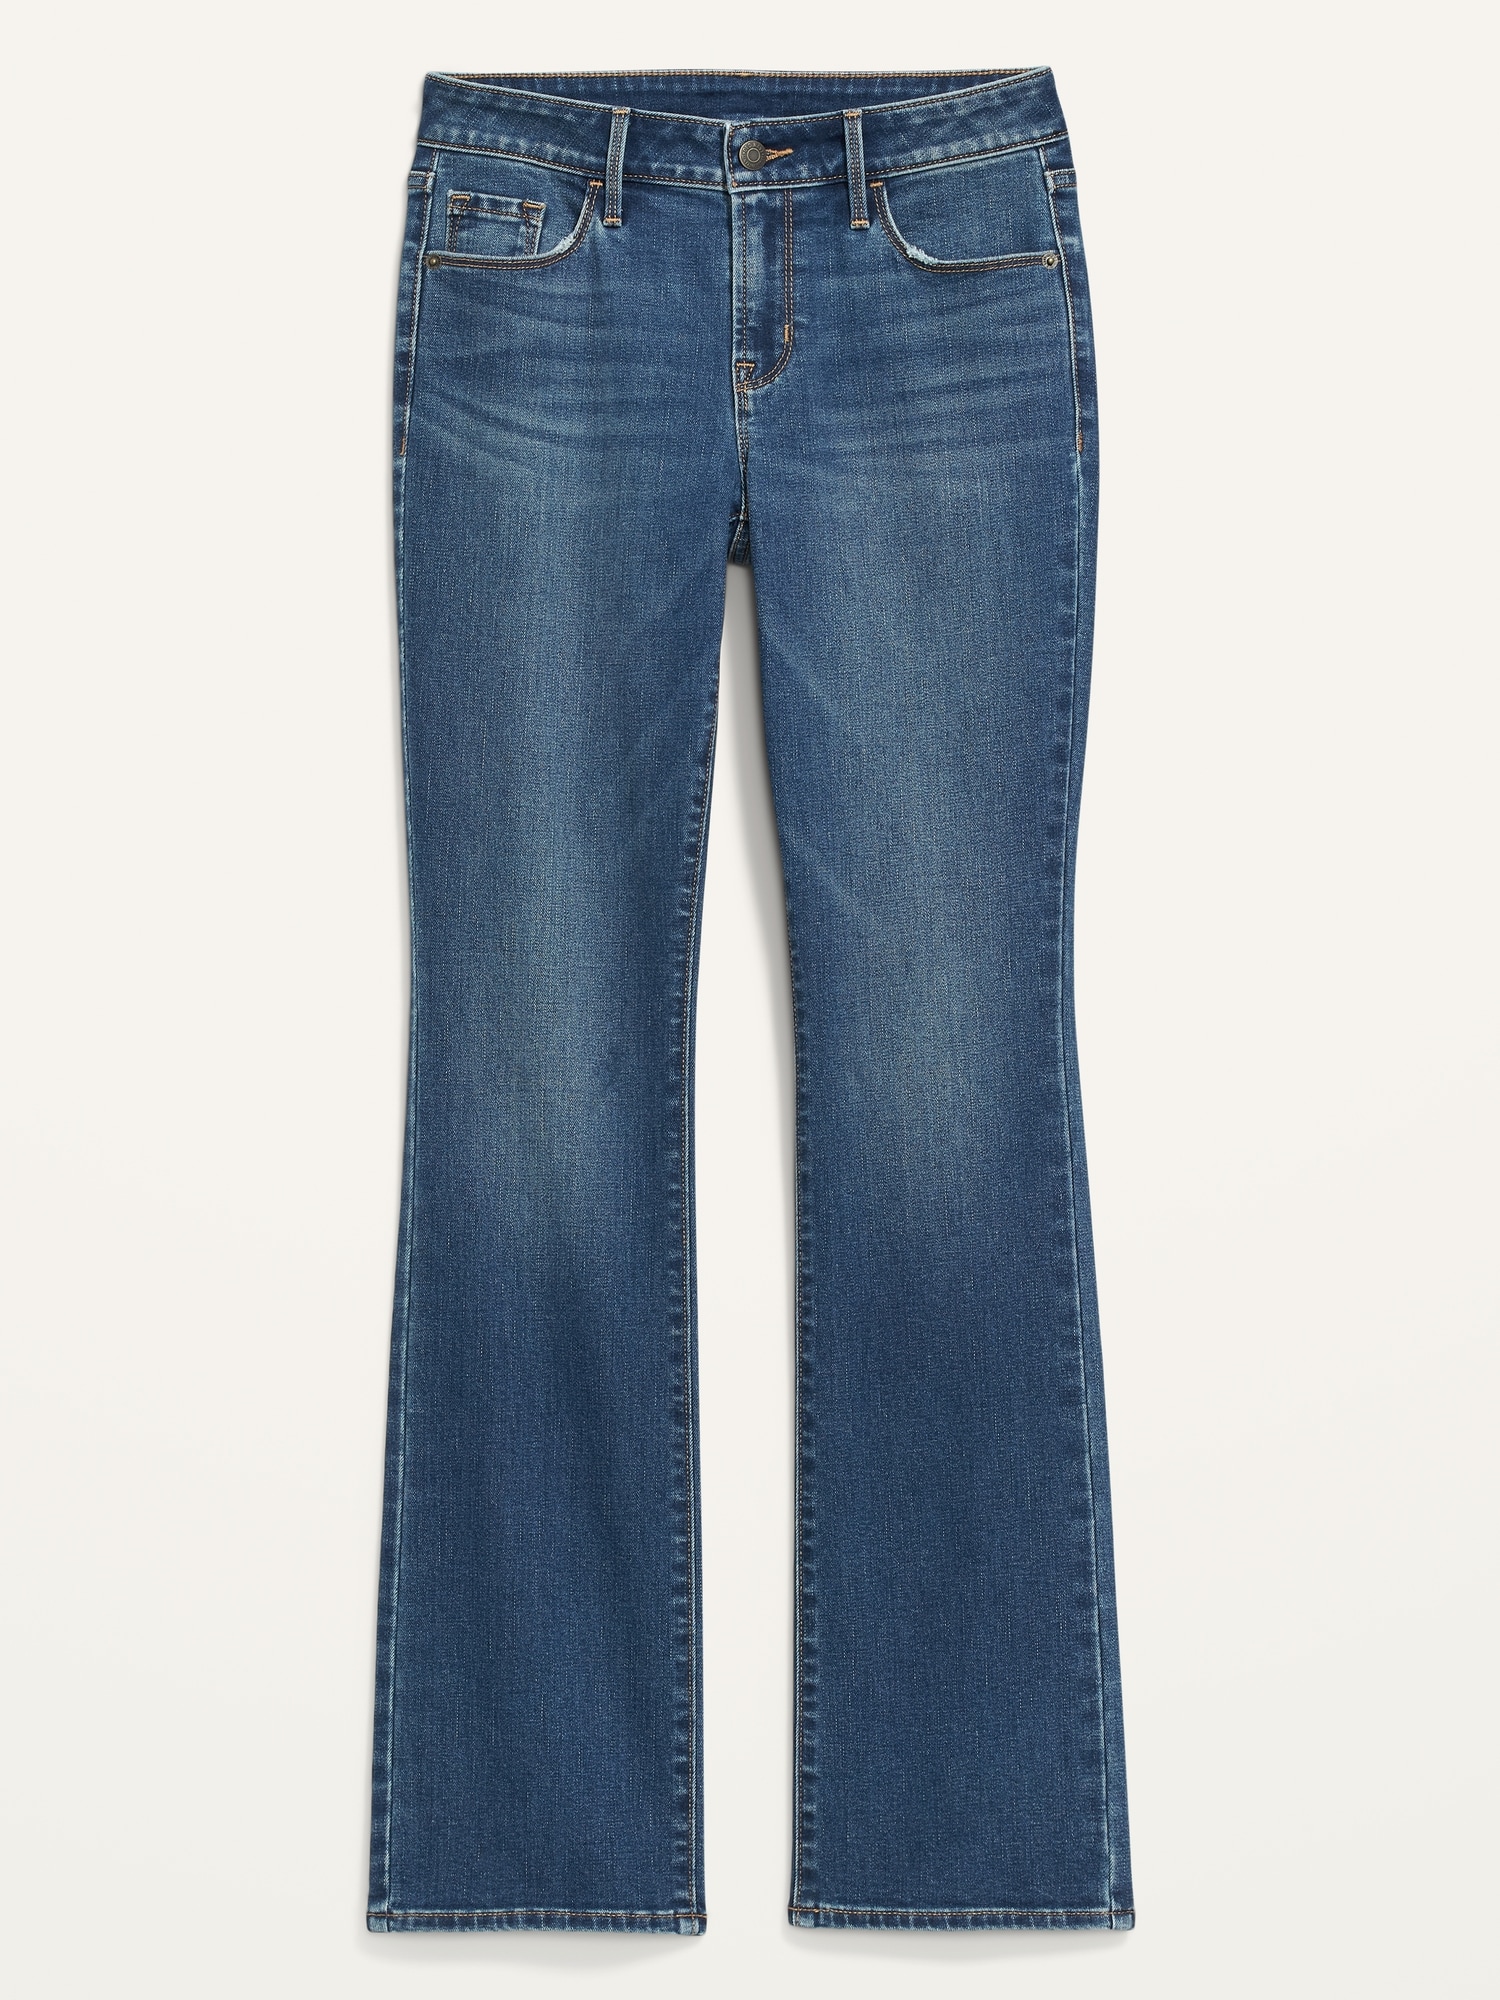 Boot-Cut Jeans for Women | Old Navy